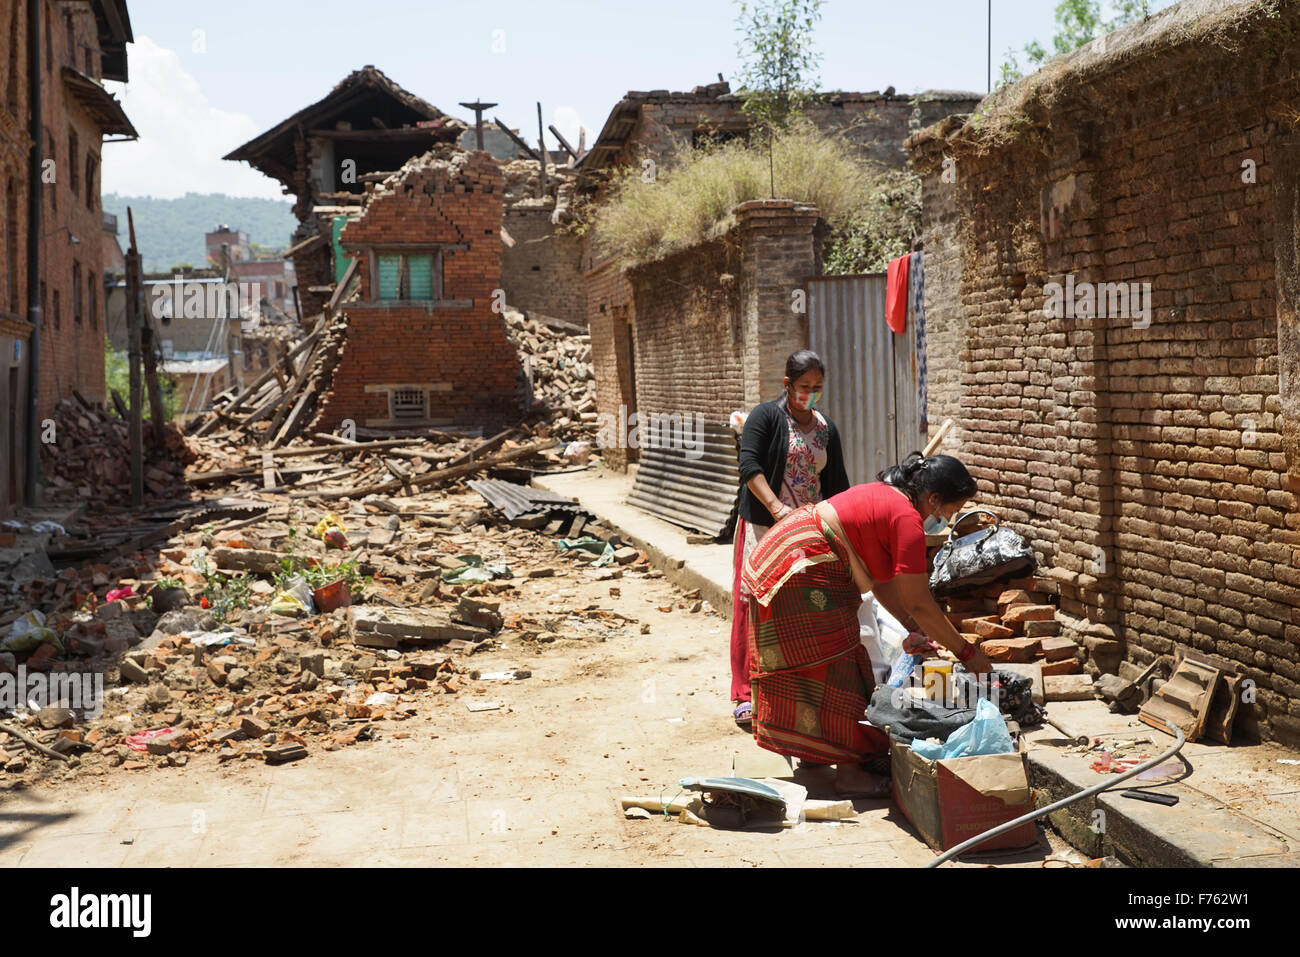 Residents retrieve belongings from collapsed homes, earthquake, nepal, asia Stock Photo